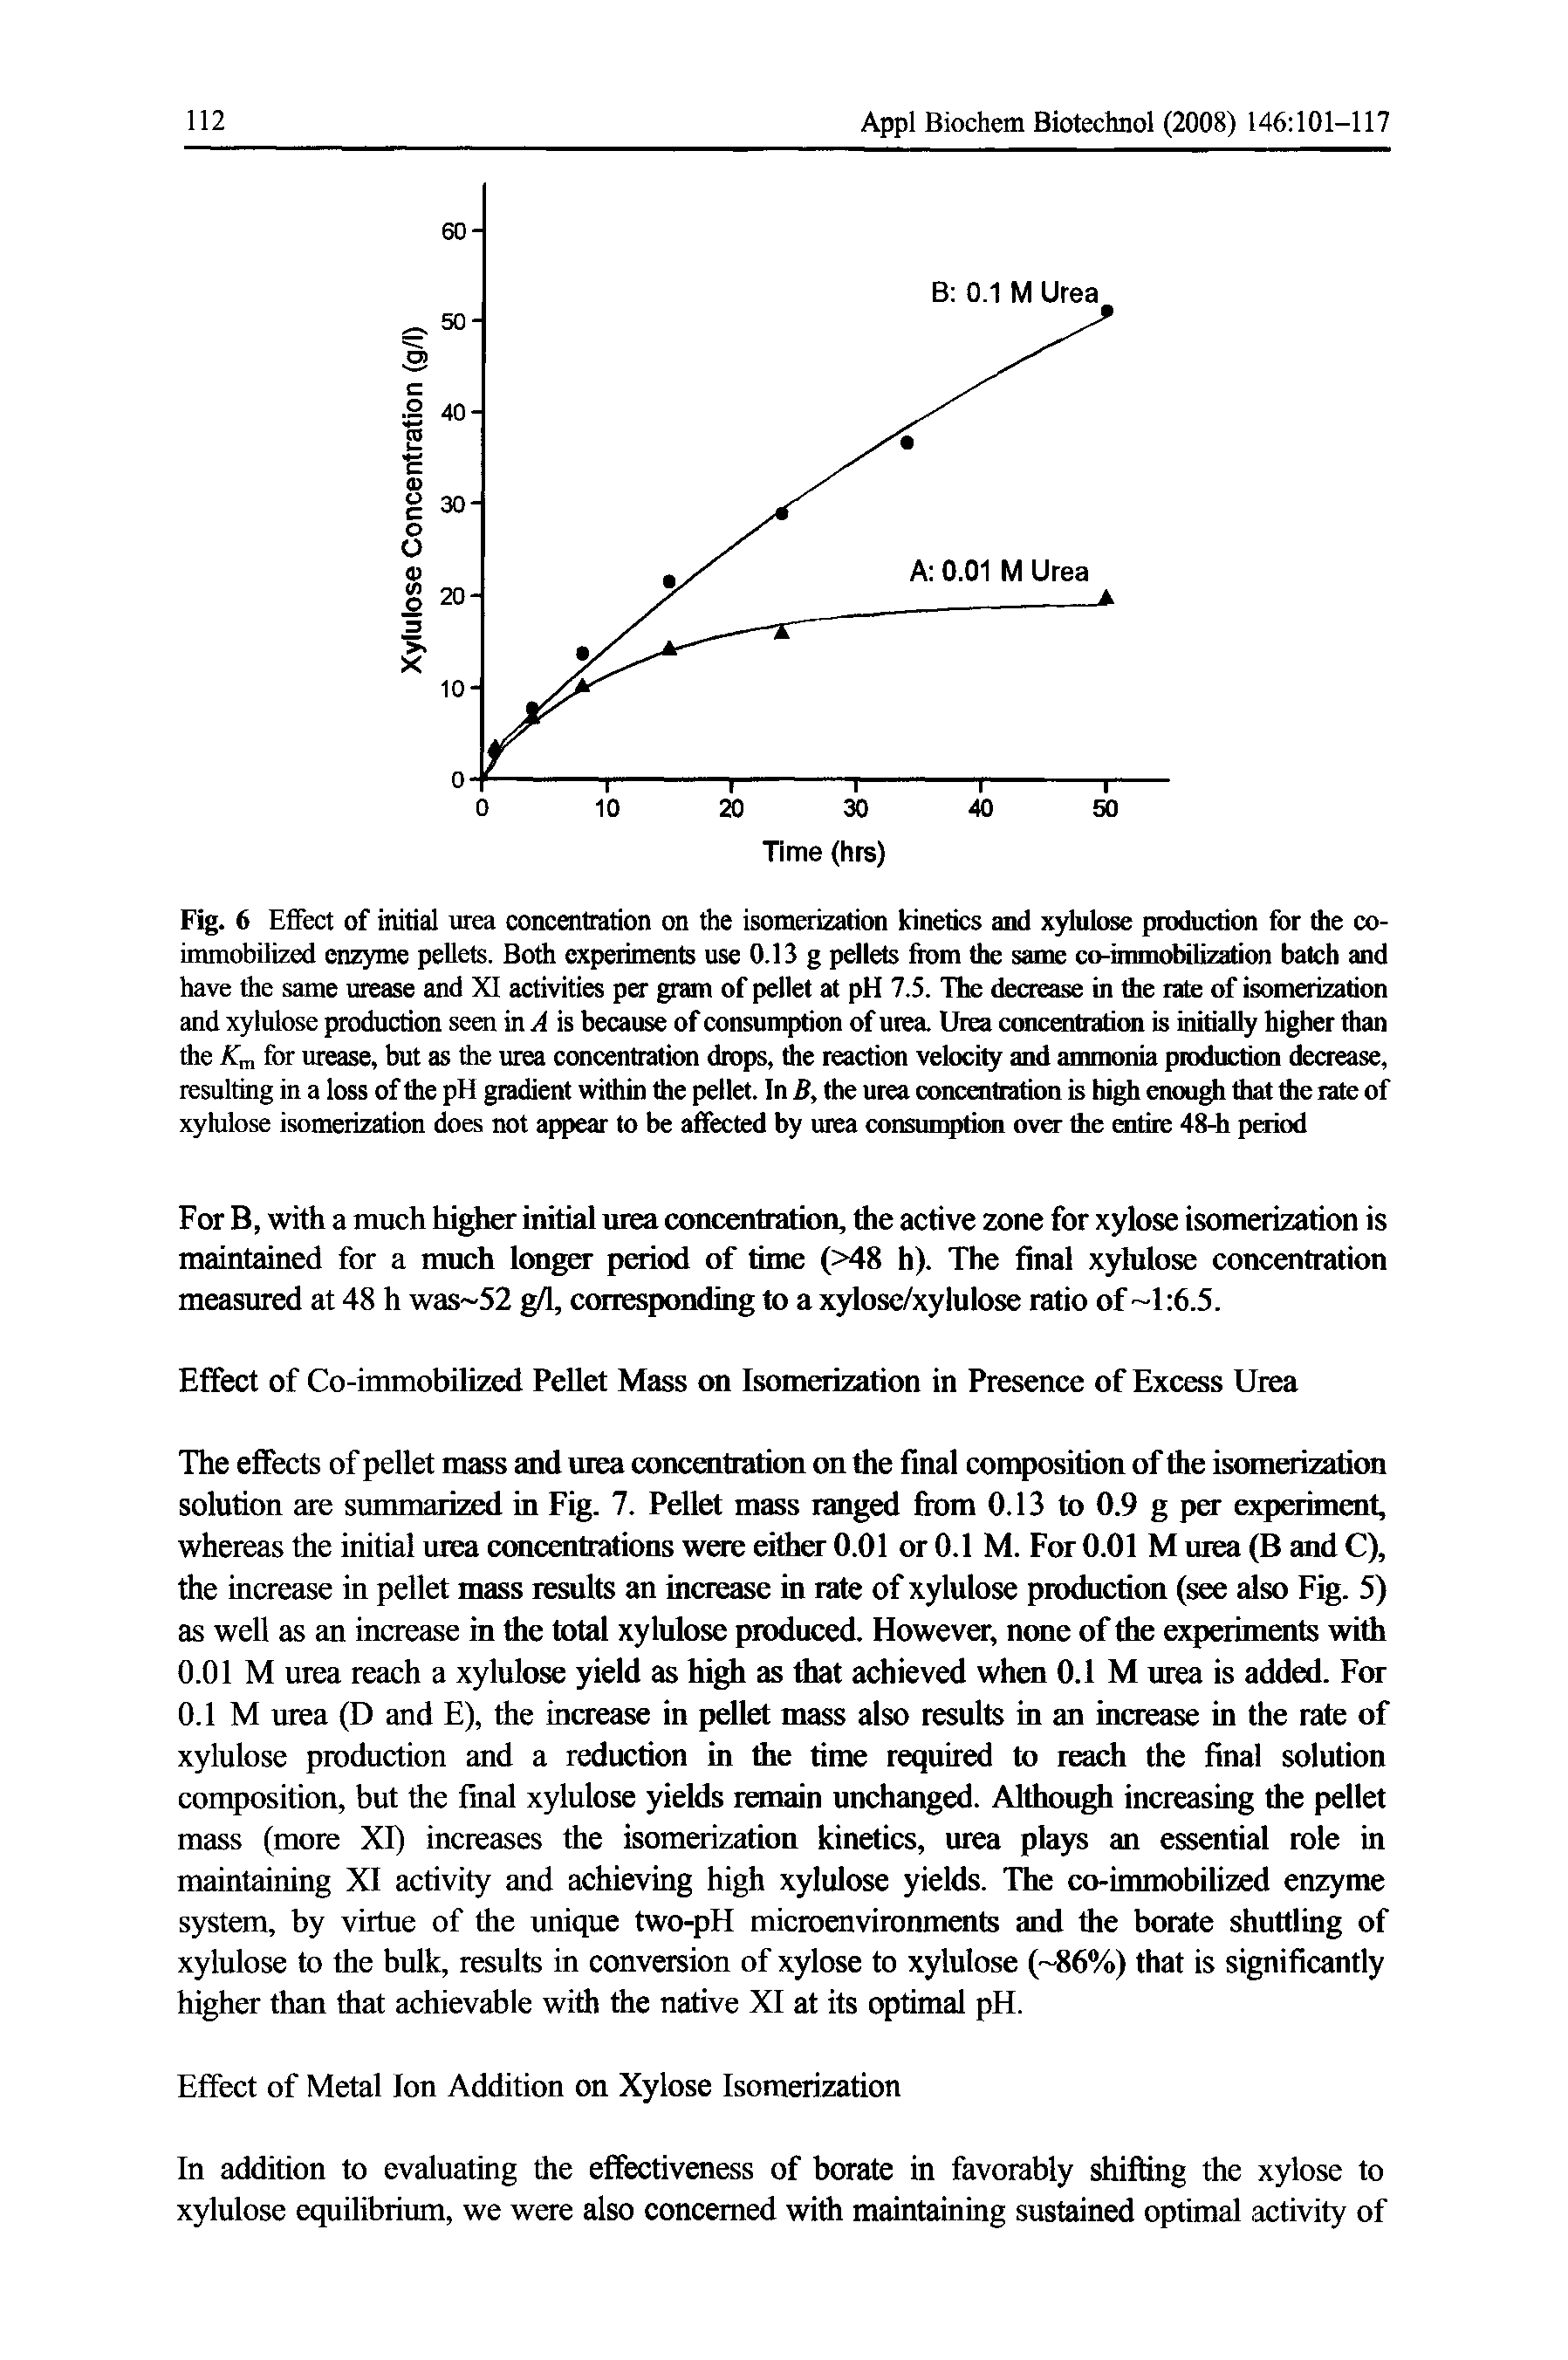 Fig. 6 Effect of initial urea concentration on the isomerization kinetics and xylulose production for the co-immobilized enzyme pellets. Both experiments use 0.13 g pellets from the same co-immobilization batch and have the same urease and XI activities per gram of pellet at pH 7.5. The decrease in the rate of isomerization and xylulose production seen in A is because of consumption of urea. Urea concentration is initially higher than the Xn, for urease, but as the urea concentration drops, the reaction velocity and ammonia production decrease, resulting in a loss of the pH gradient within the pellet. In B, the urea concentration is high enough that the rate of xylulose isomerization does not appear to be affected by urea consumption over the entire 48-h period...